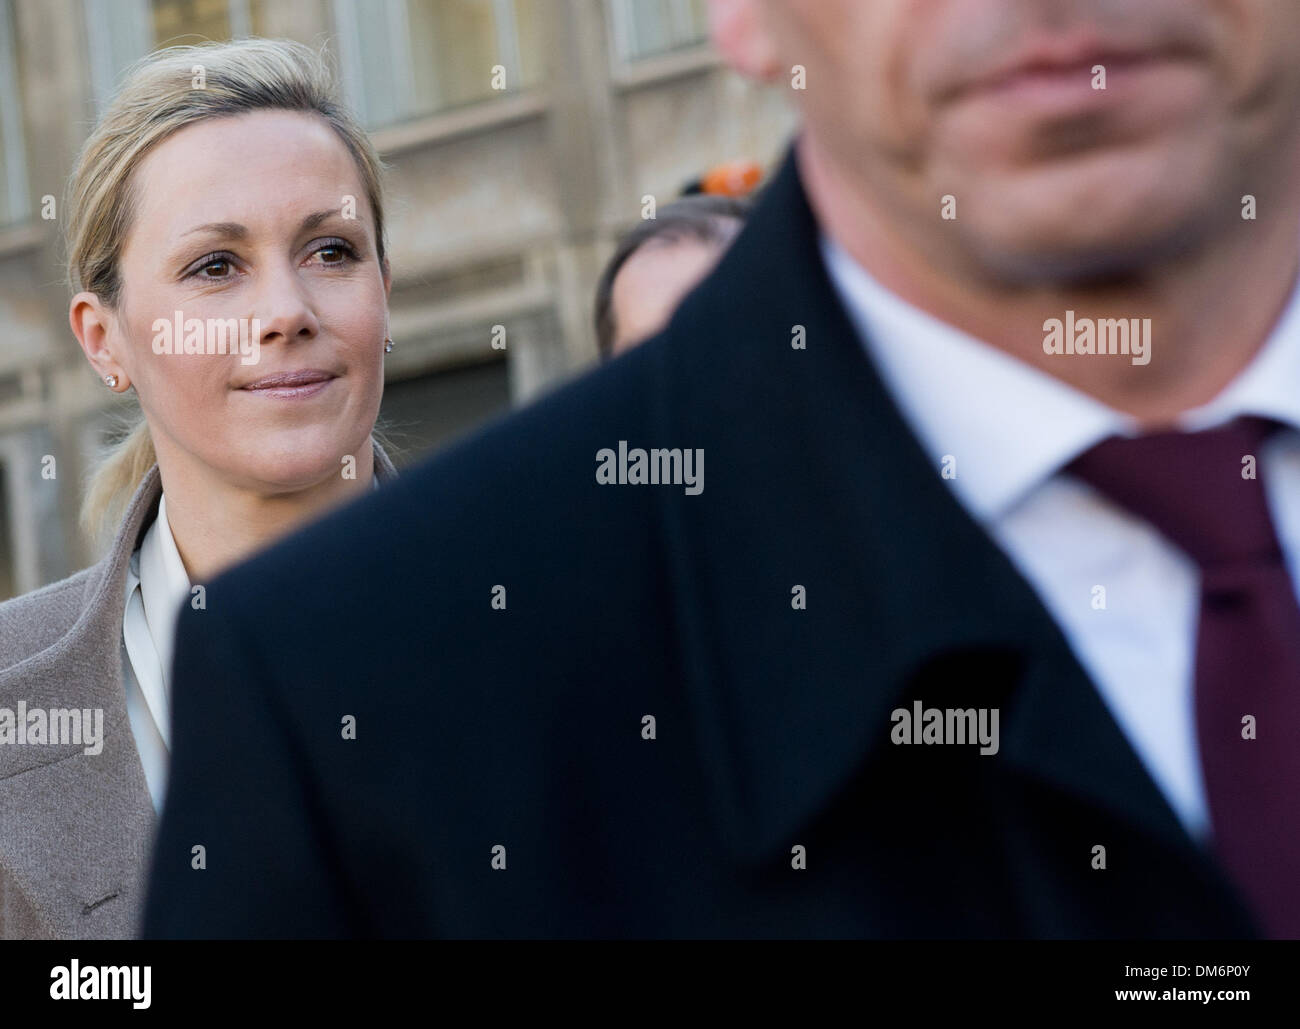 Hanover, Germany. 12th Dec, 2013. Bettina Wulff leaves the regional court in Hanover, Germany, 12 December 2013. Her husband, former German President Wulff is on trial for accepting favours. Bettina was called to give testimony. Photo: JULIAN STRATENSCHULTE/dpa/Alamy Live News Stock Photo